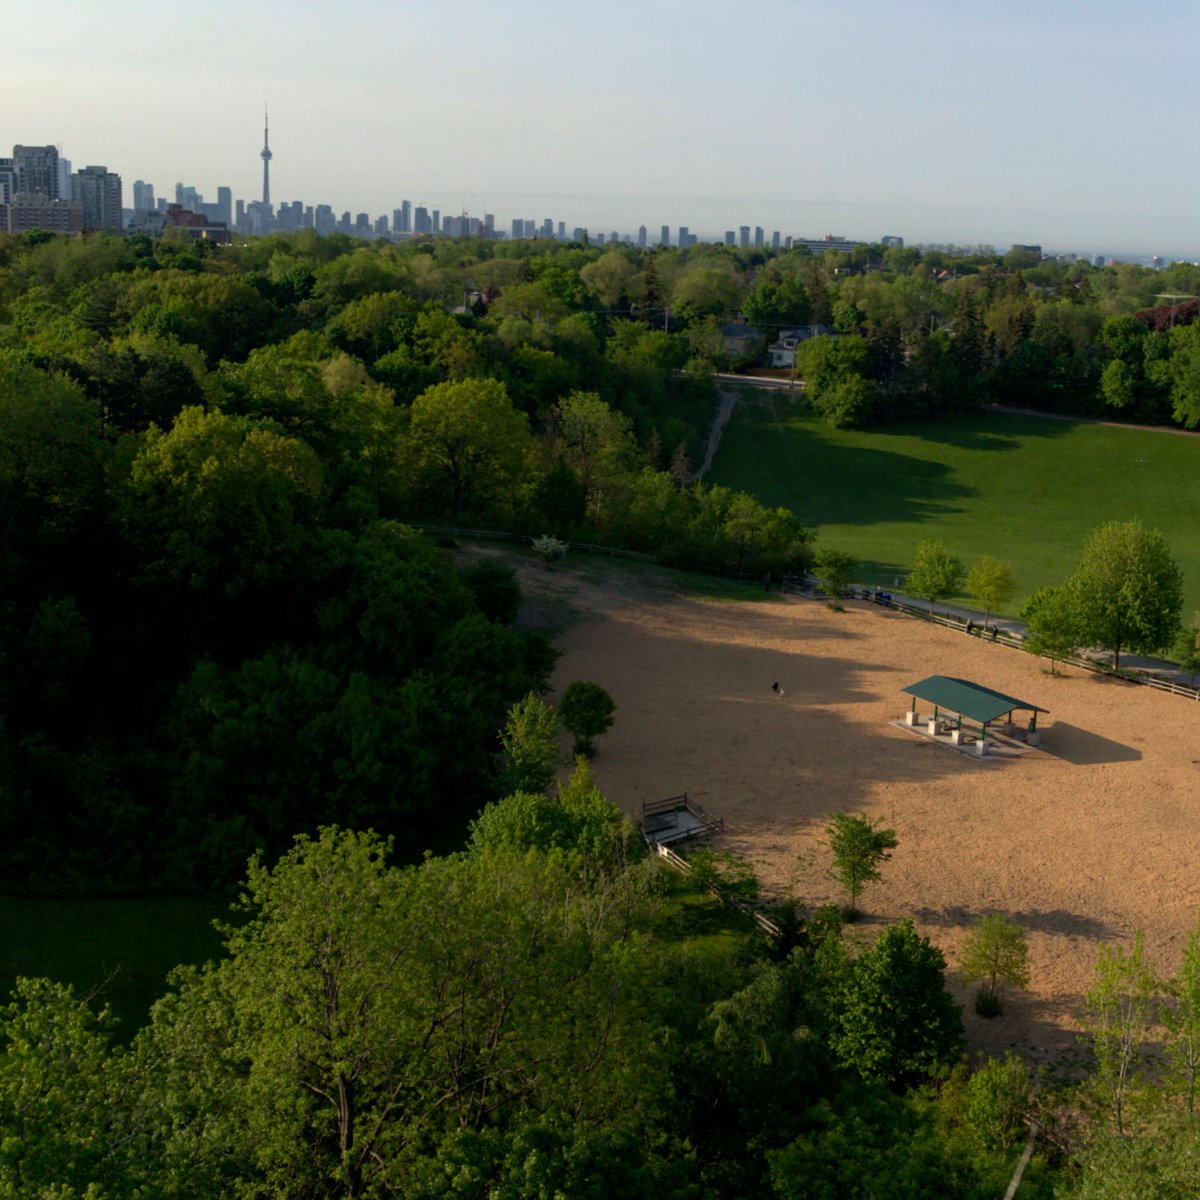 Take a survey to share your experience of dog off-leash areas: toronto.ca/city-governmen… We're looking for input on how to balance park space for both people and dogs in our growing city. Your feedback will help improve the off-leash experience for all park users.